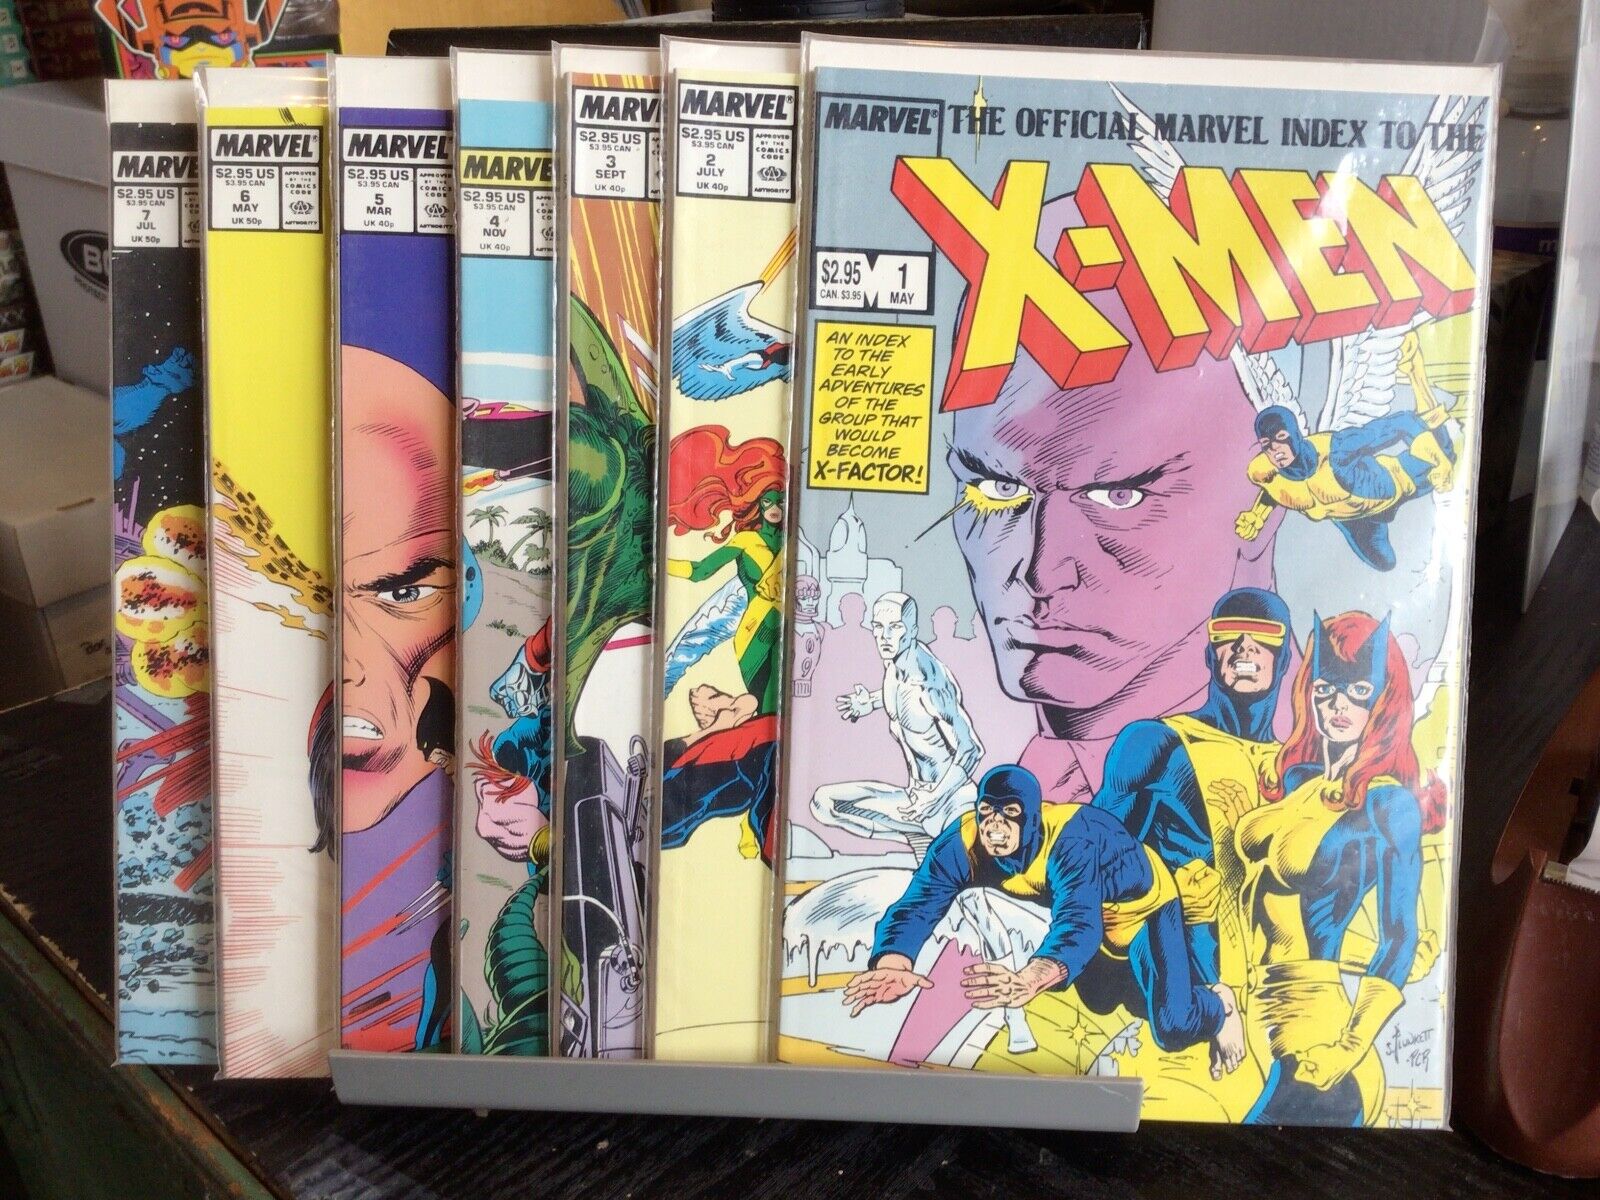 OFFICIAL MARVEL INDEX TO X-MEN #1-7 FULL SET 1987 NICE CONDITION